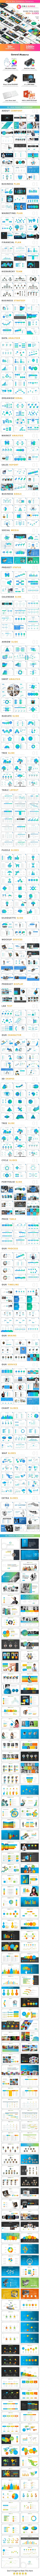 GraphicRiver 2 in 1 Business Bundle Powerpoint 21163651